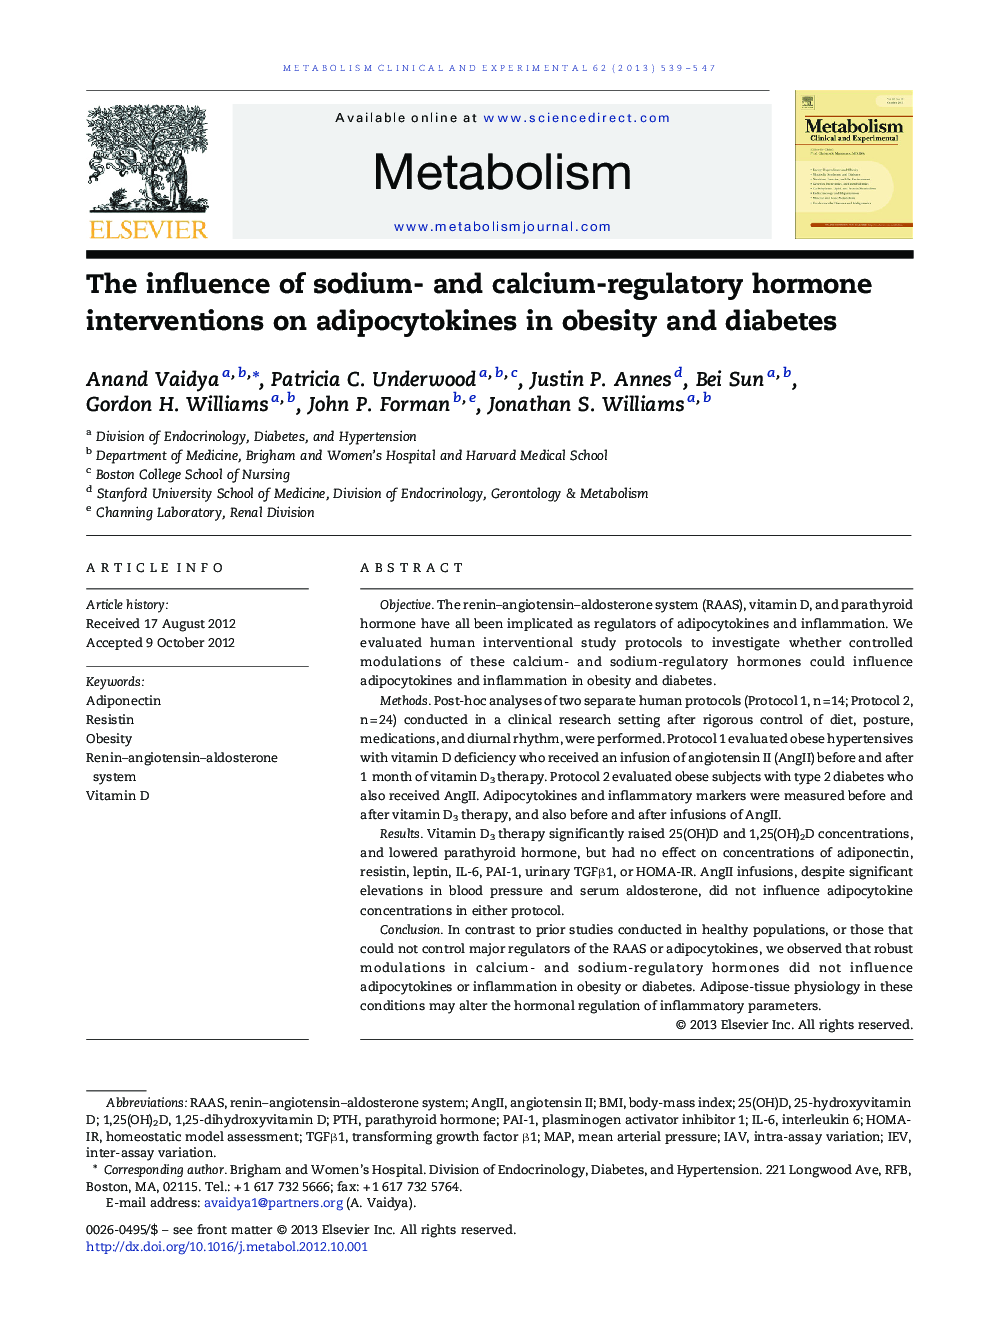 The influence of sodium- and calcium-regulatory hormone interventions on adipocytokines in obesity and diabetes